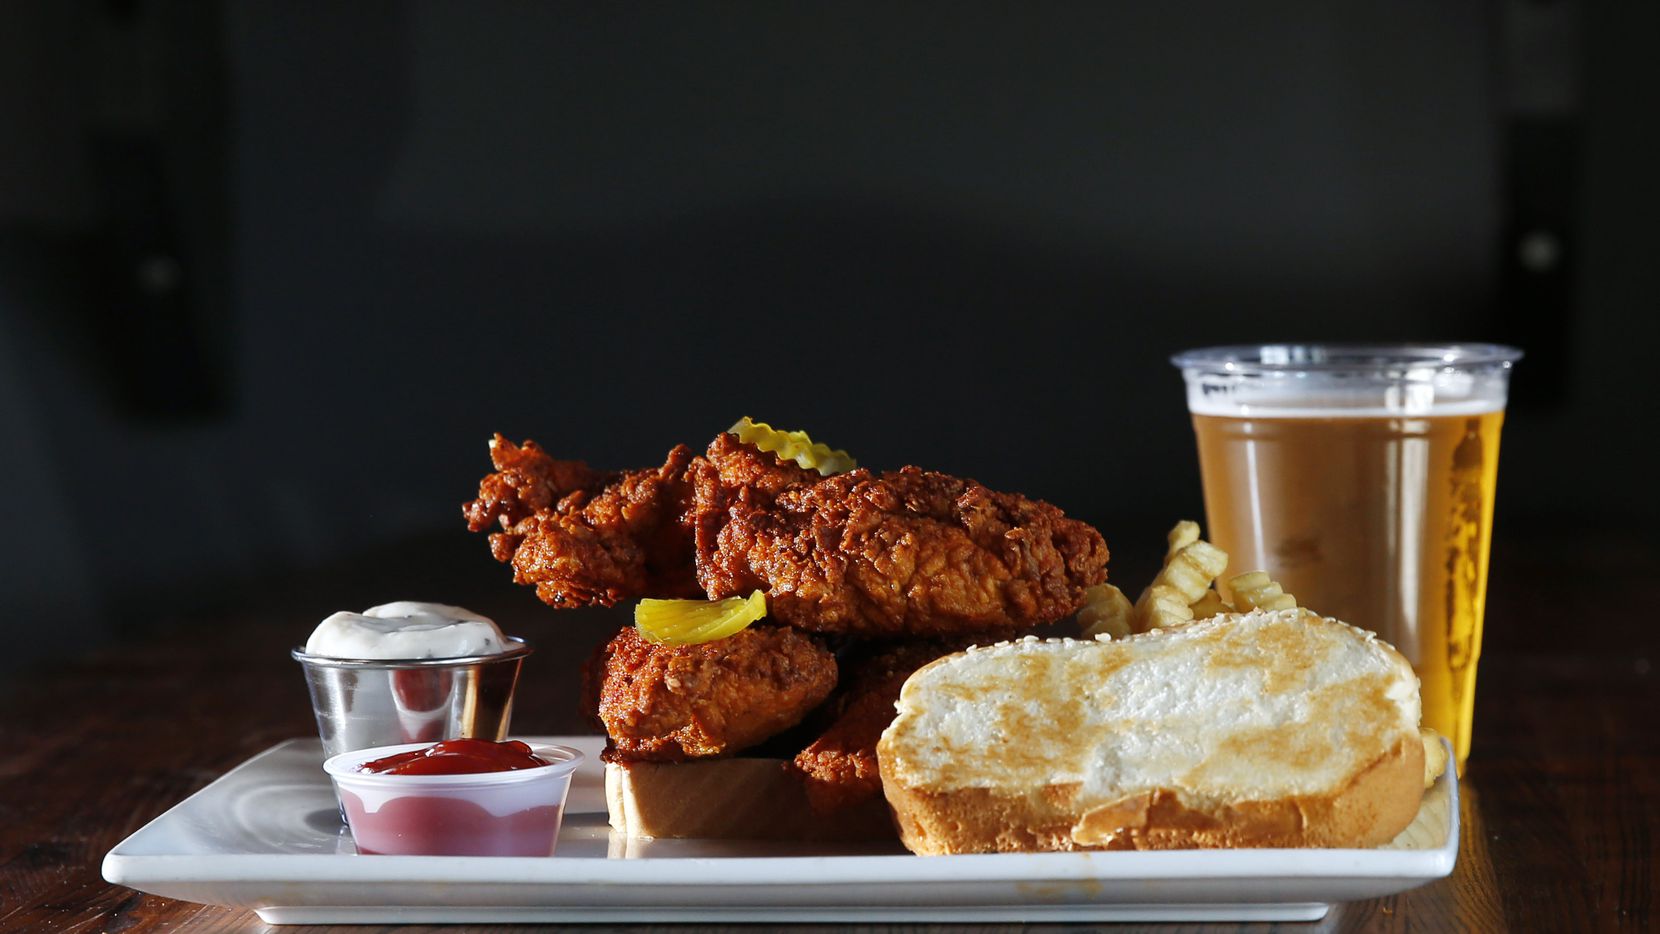 East Dallas has two brand-new hot chicken restaurants. More are coming to Dallas in the next few months.